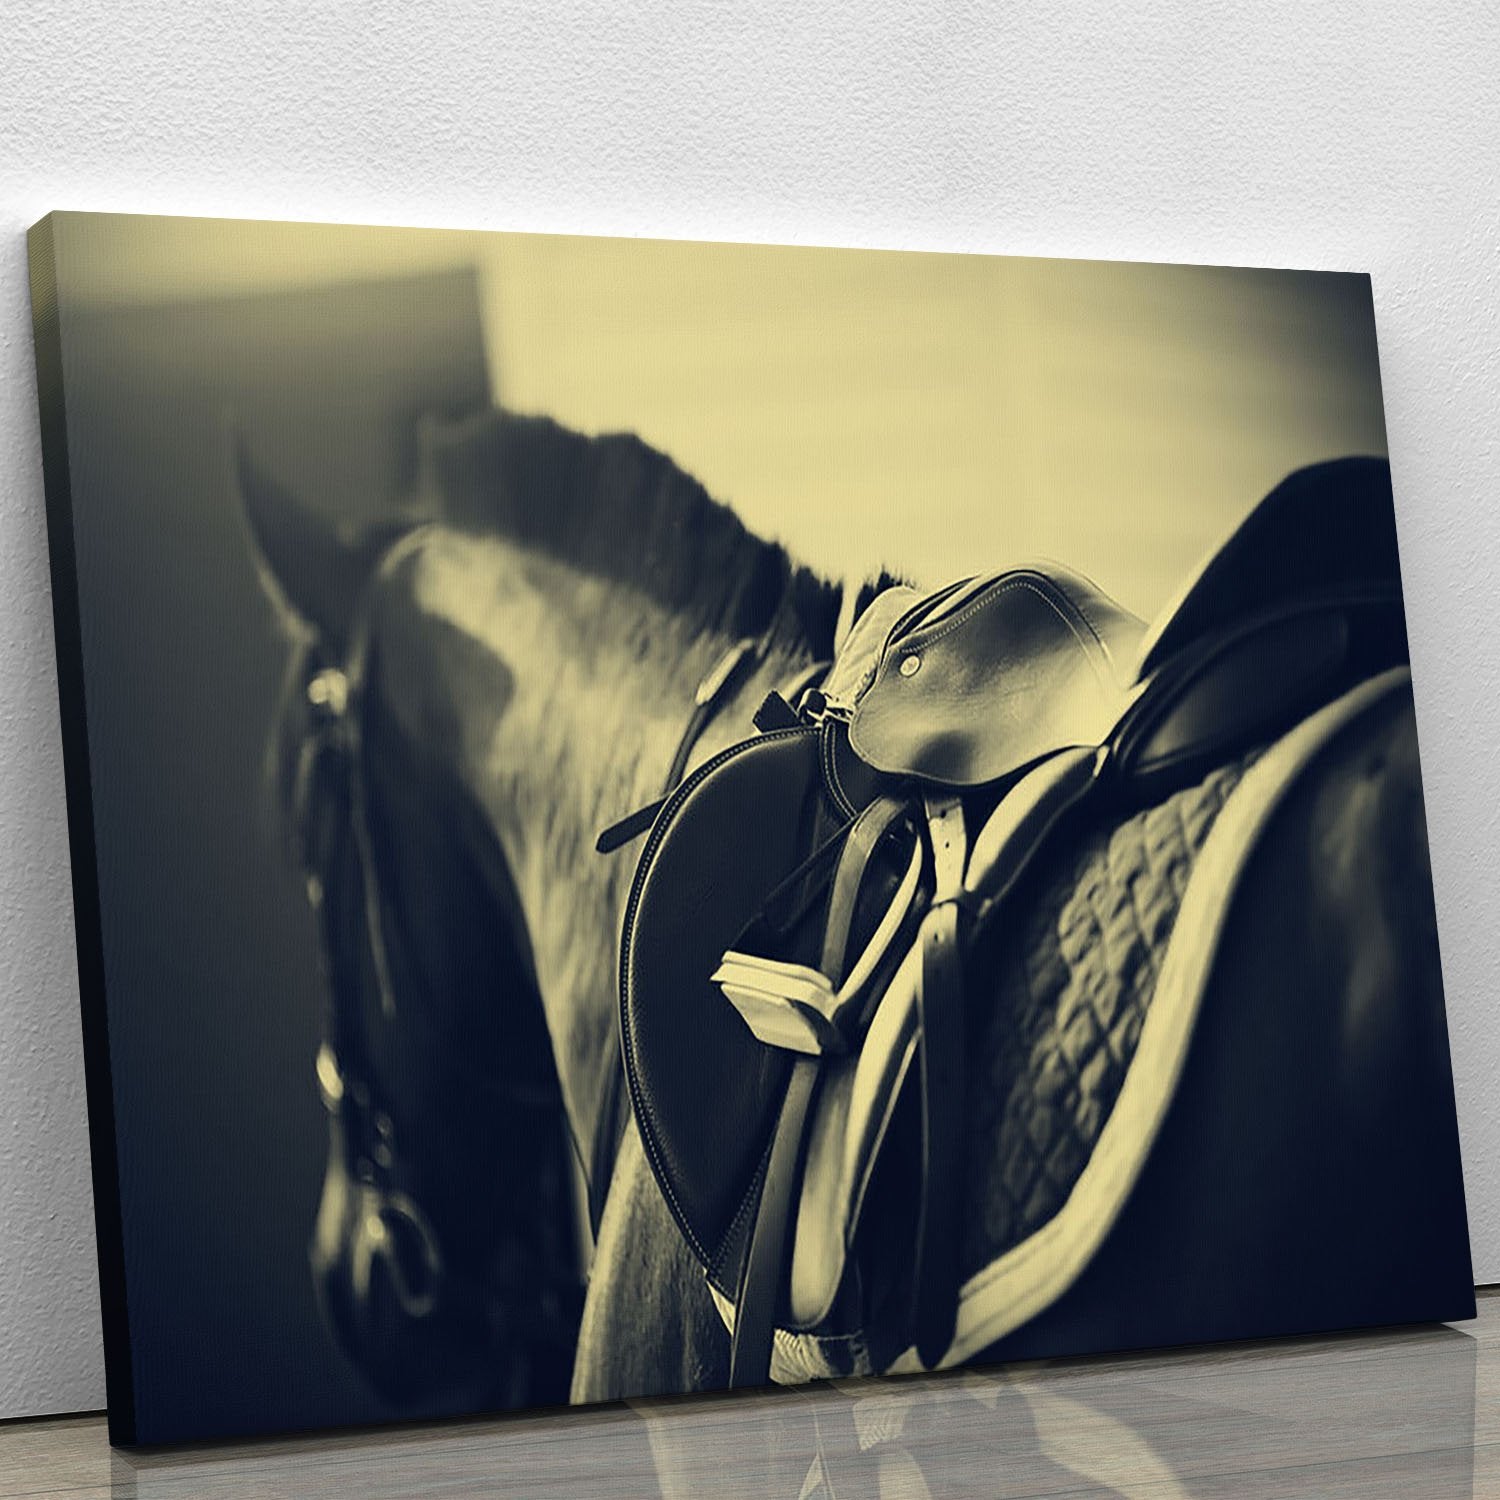 Saddle with stirrups on a back of a sport horse Canvas Print or Poster